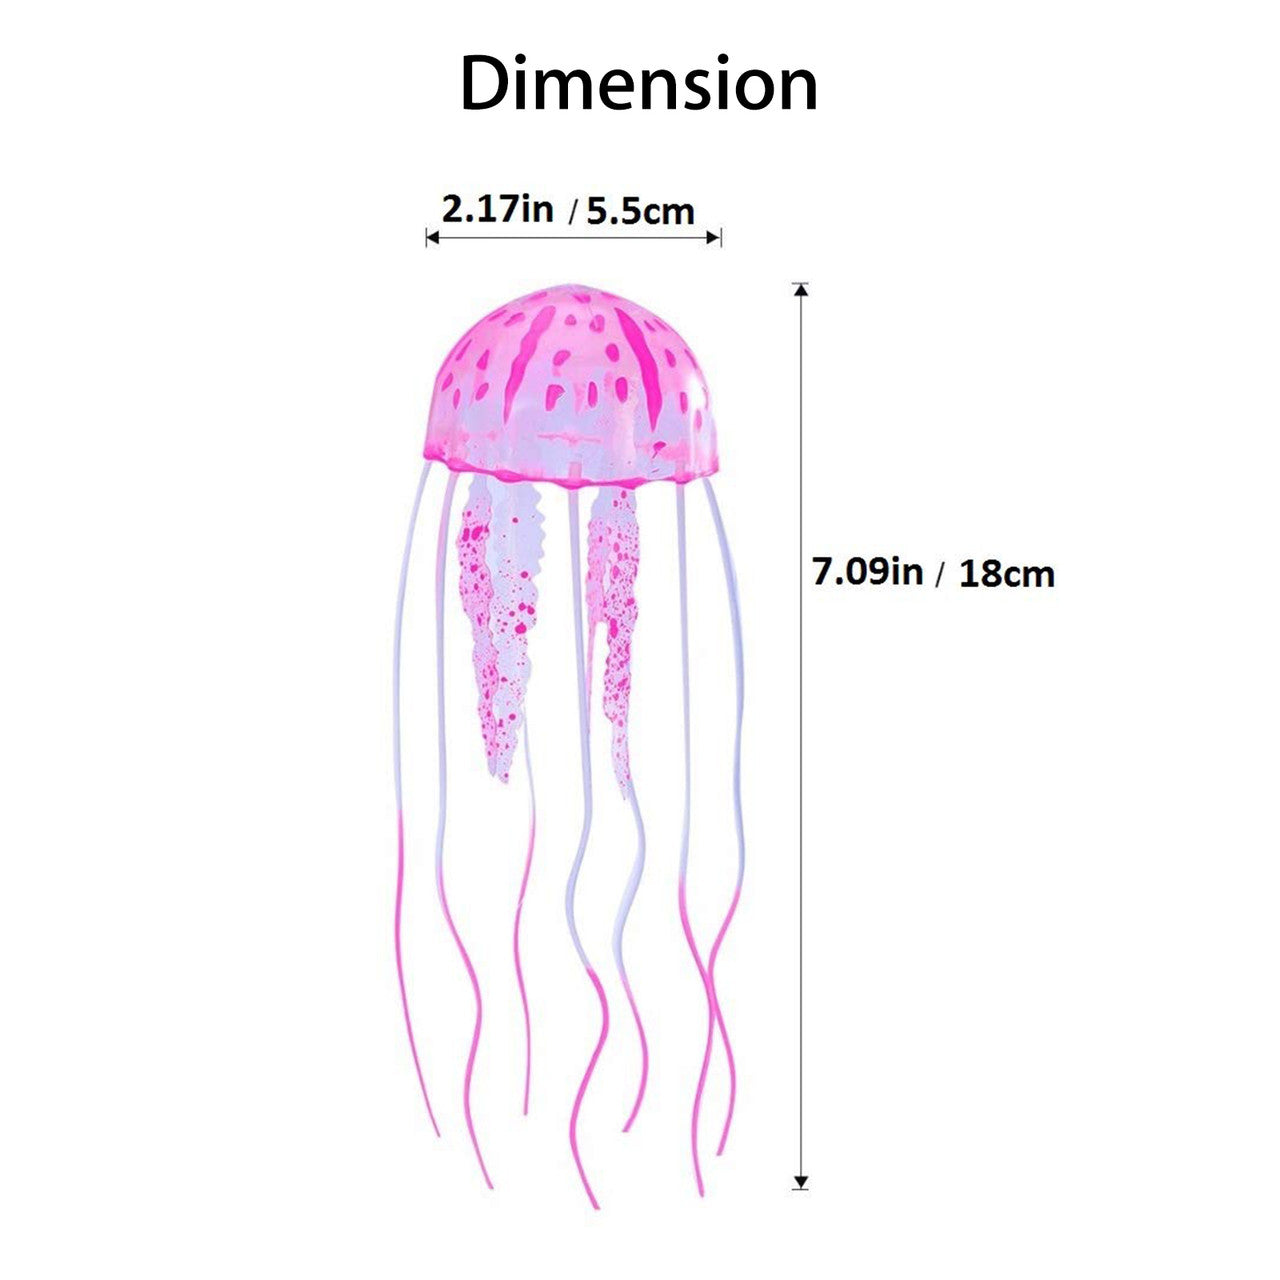 Glowing Effect Artificial Jellyfish Ornament for Fish Tank Aquarium Decoration, Safe for Fish,Instant Suction Cup Installation, 4-pack